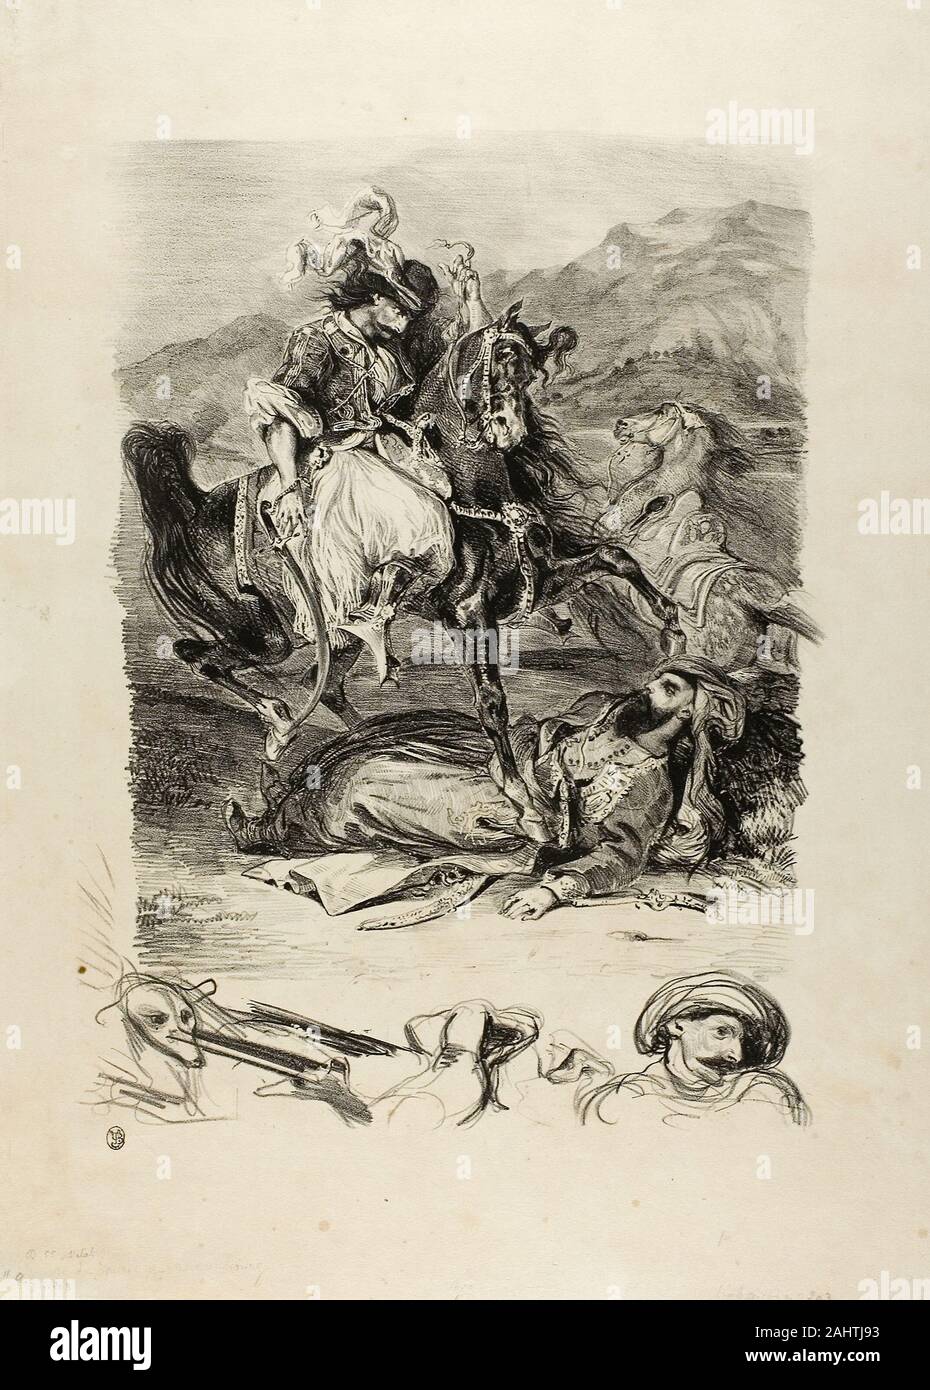 Eugène Delacroix. Combat Between Giaour and Pasha. 1827. France. Lithograph in black on ivory wove paper The success of Lord Byron’s 1813 poem “The Giaour” fanned the flames of Orientalism in art and literature. Eugène Delacroix produced a painting as well as this print immortalizing Byron’s giaour, or “nonbeliever,” who falls in love with Leila, a member of a Turkish harem. This heady mix of Eastern and Western passions and beliefs has a predictably bad ending. After her master fatally throws Leila into the sea (an accepted punishment for adulterous women), her lover kills him before retreati Stock Photo